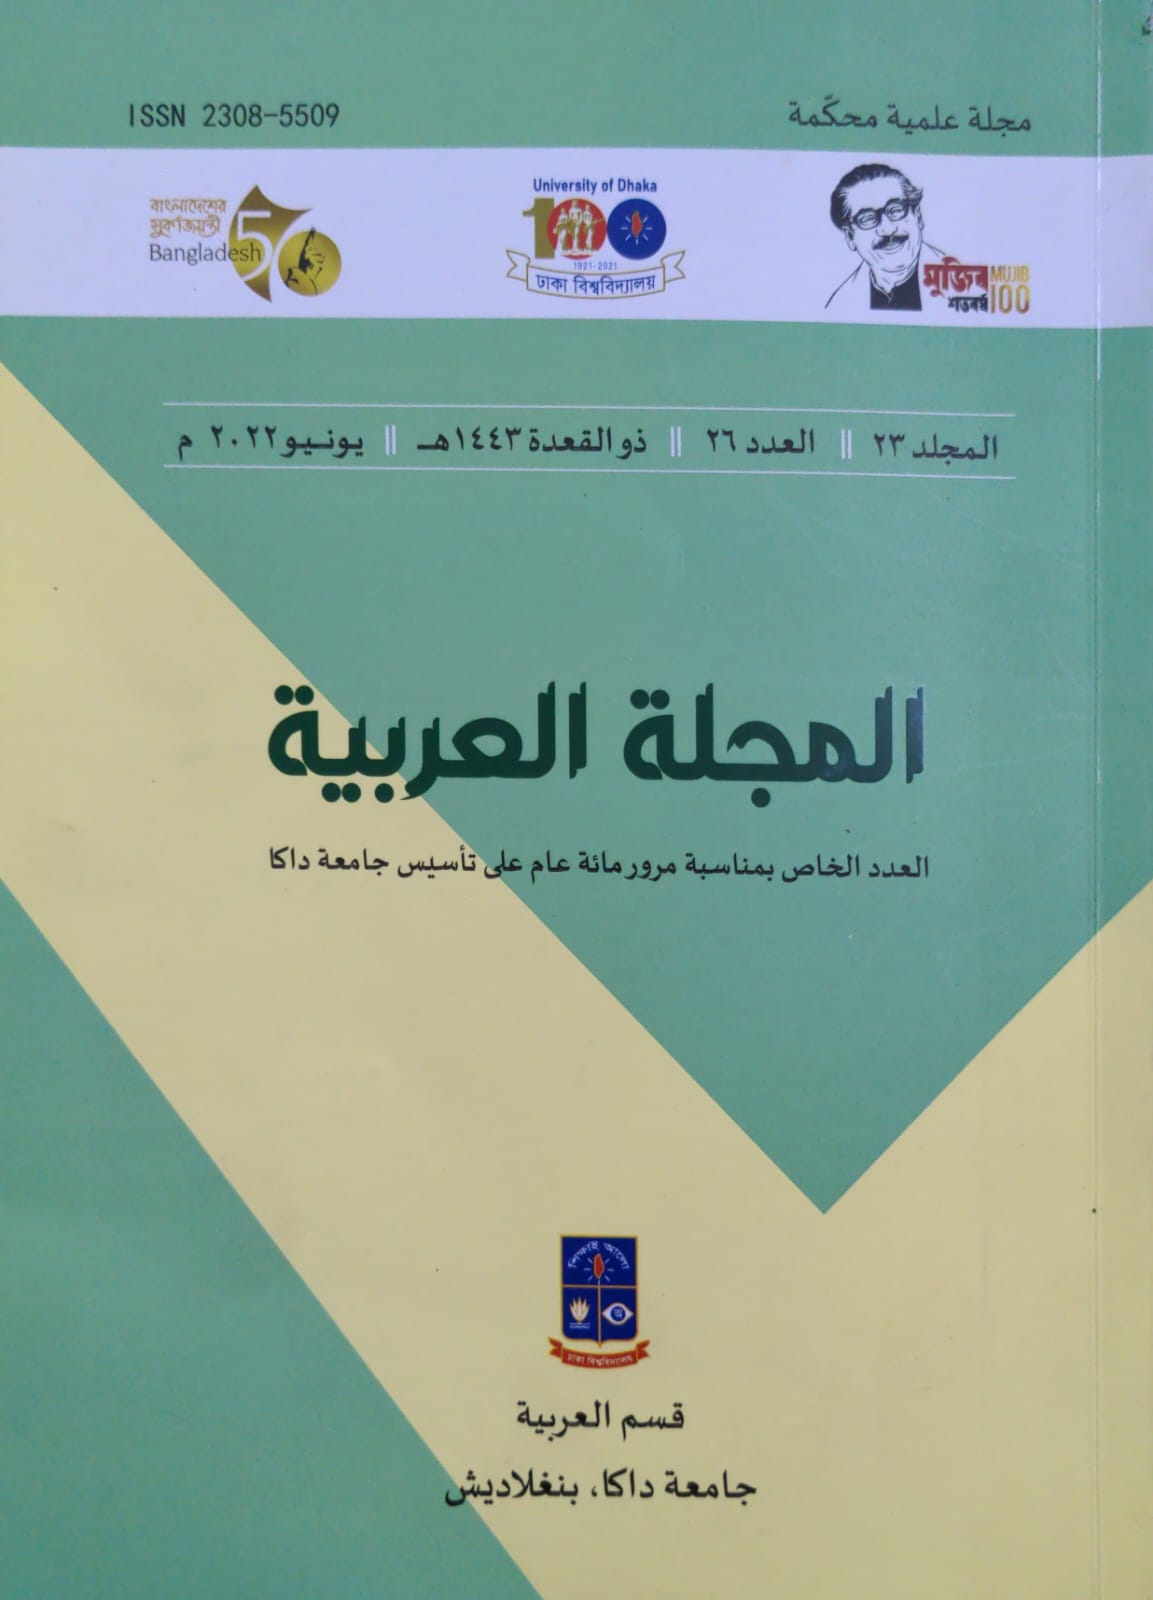 					View Vol. 23 No. 26 (2022): The Dhaka University Arabic Journal ( Special Issue on Centennial Celebration of the University of Dhaka)
				